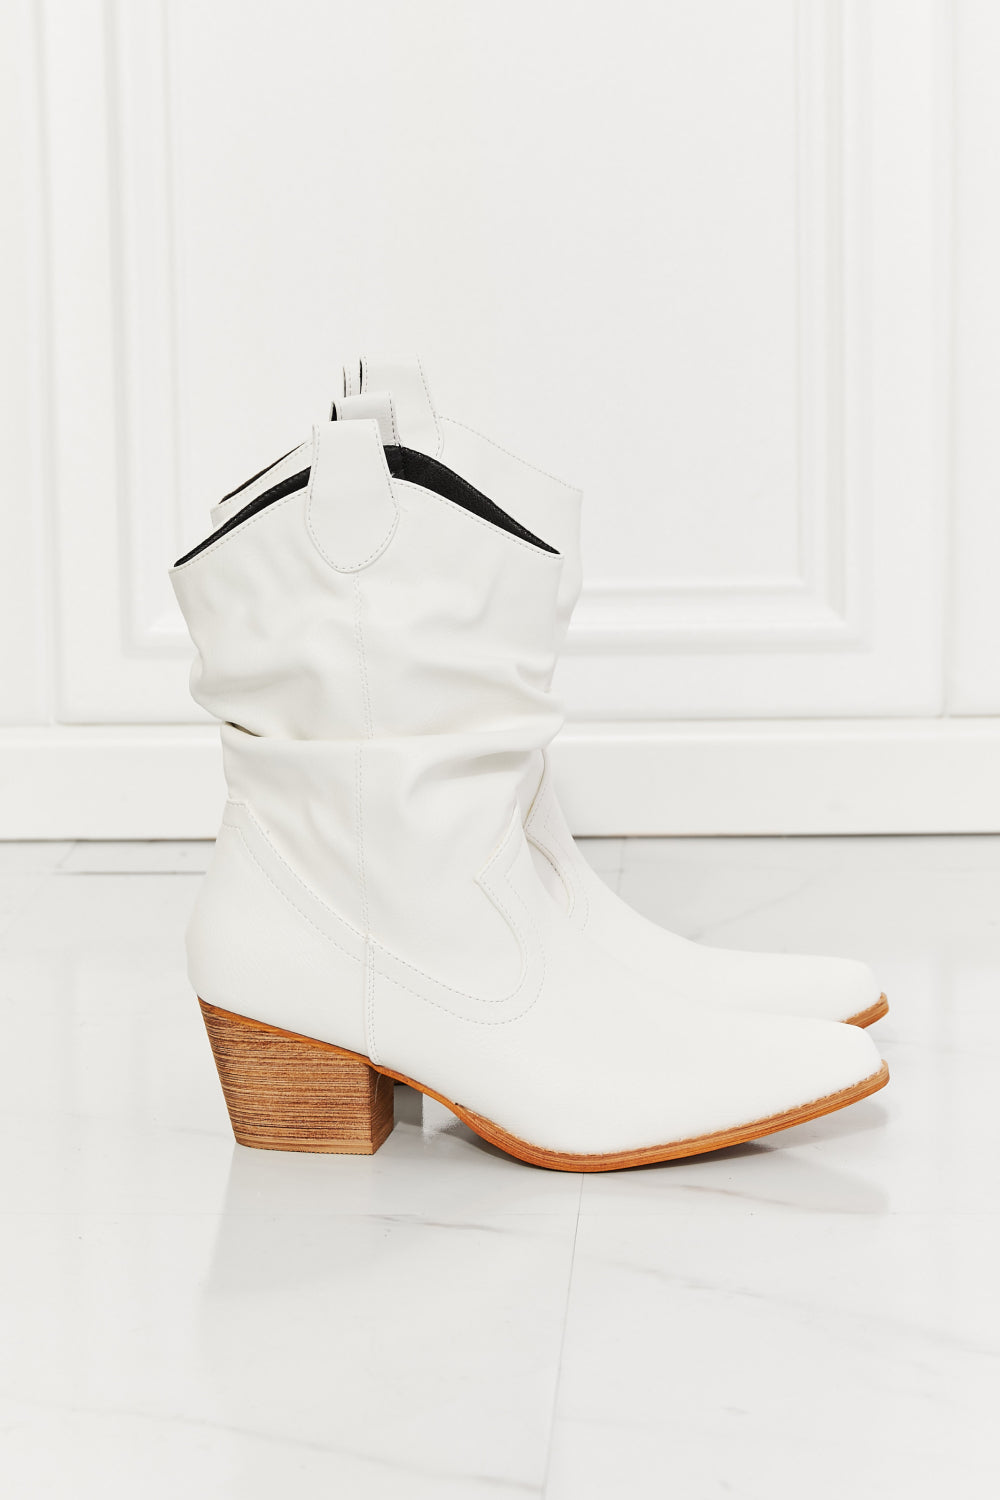 MMShoes Better in Texas Scrunch White Cowgirl Boots - Ships from The Us - women's boots at TFC&H Co.